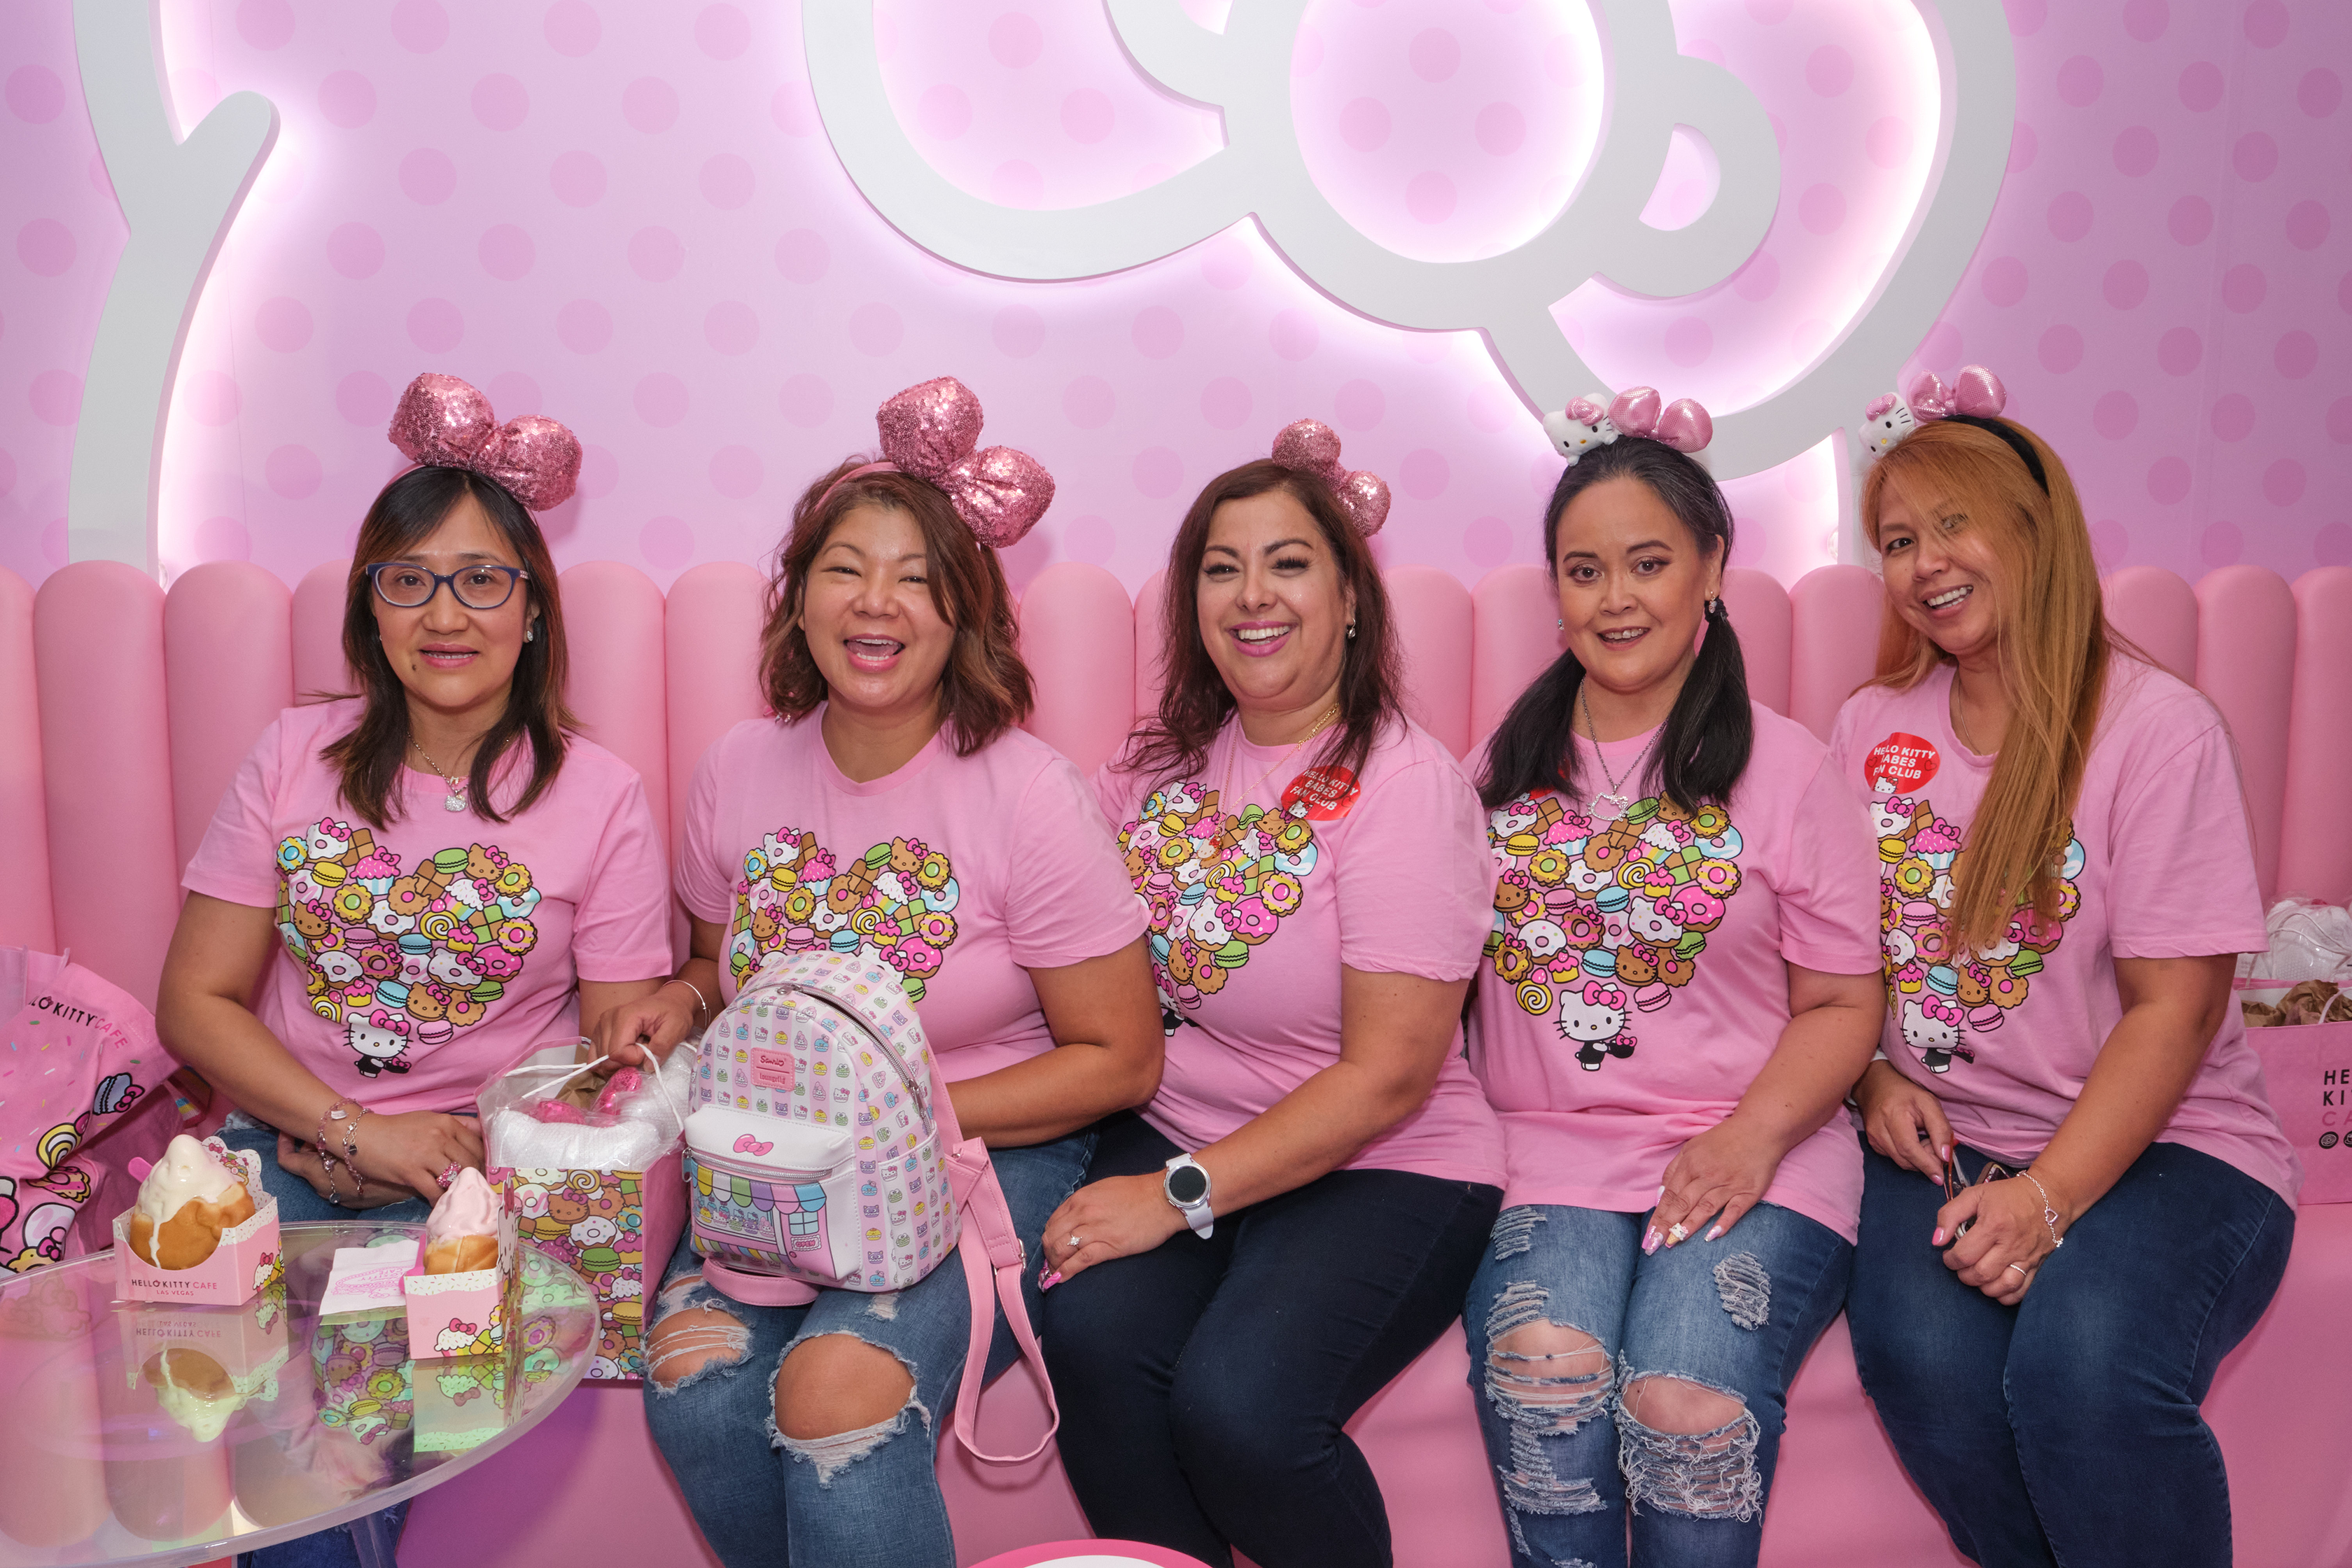 Hello Kitty Cafe set to open location at Las Vegas mall in July